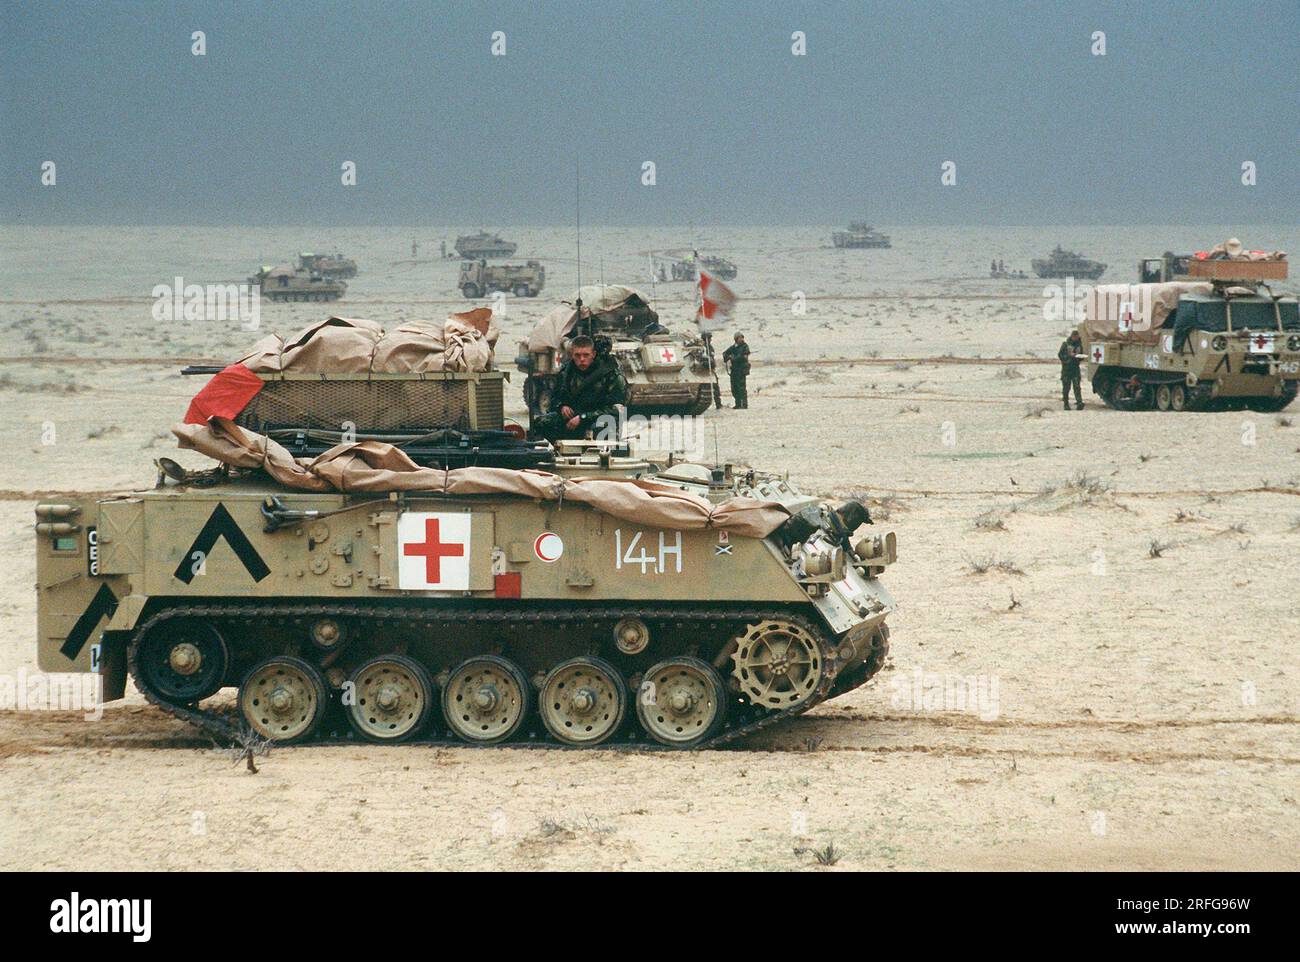 KUWAIT - 28 February 1991 - Armoured medical vehicles of the British Army's 7th Brigade Royal Scots, 1st Armoured Division, are positioned north of th Stock Photo